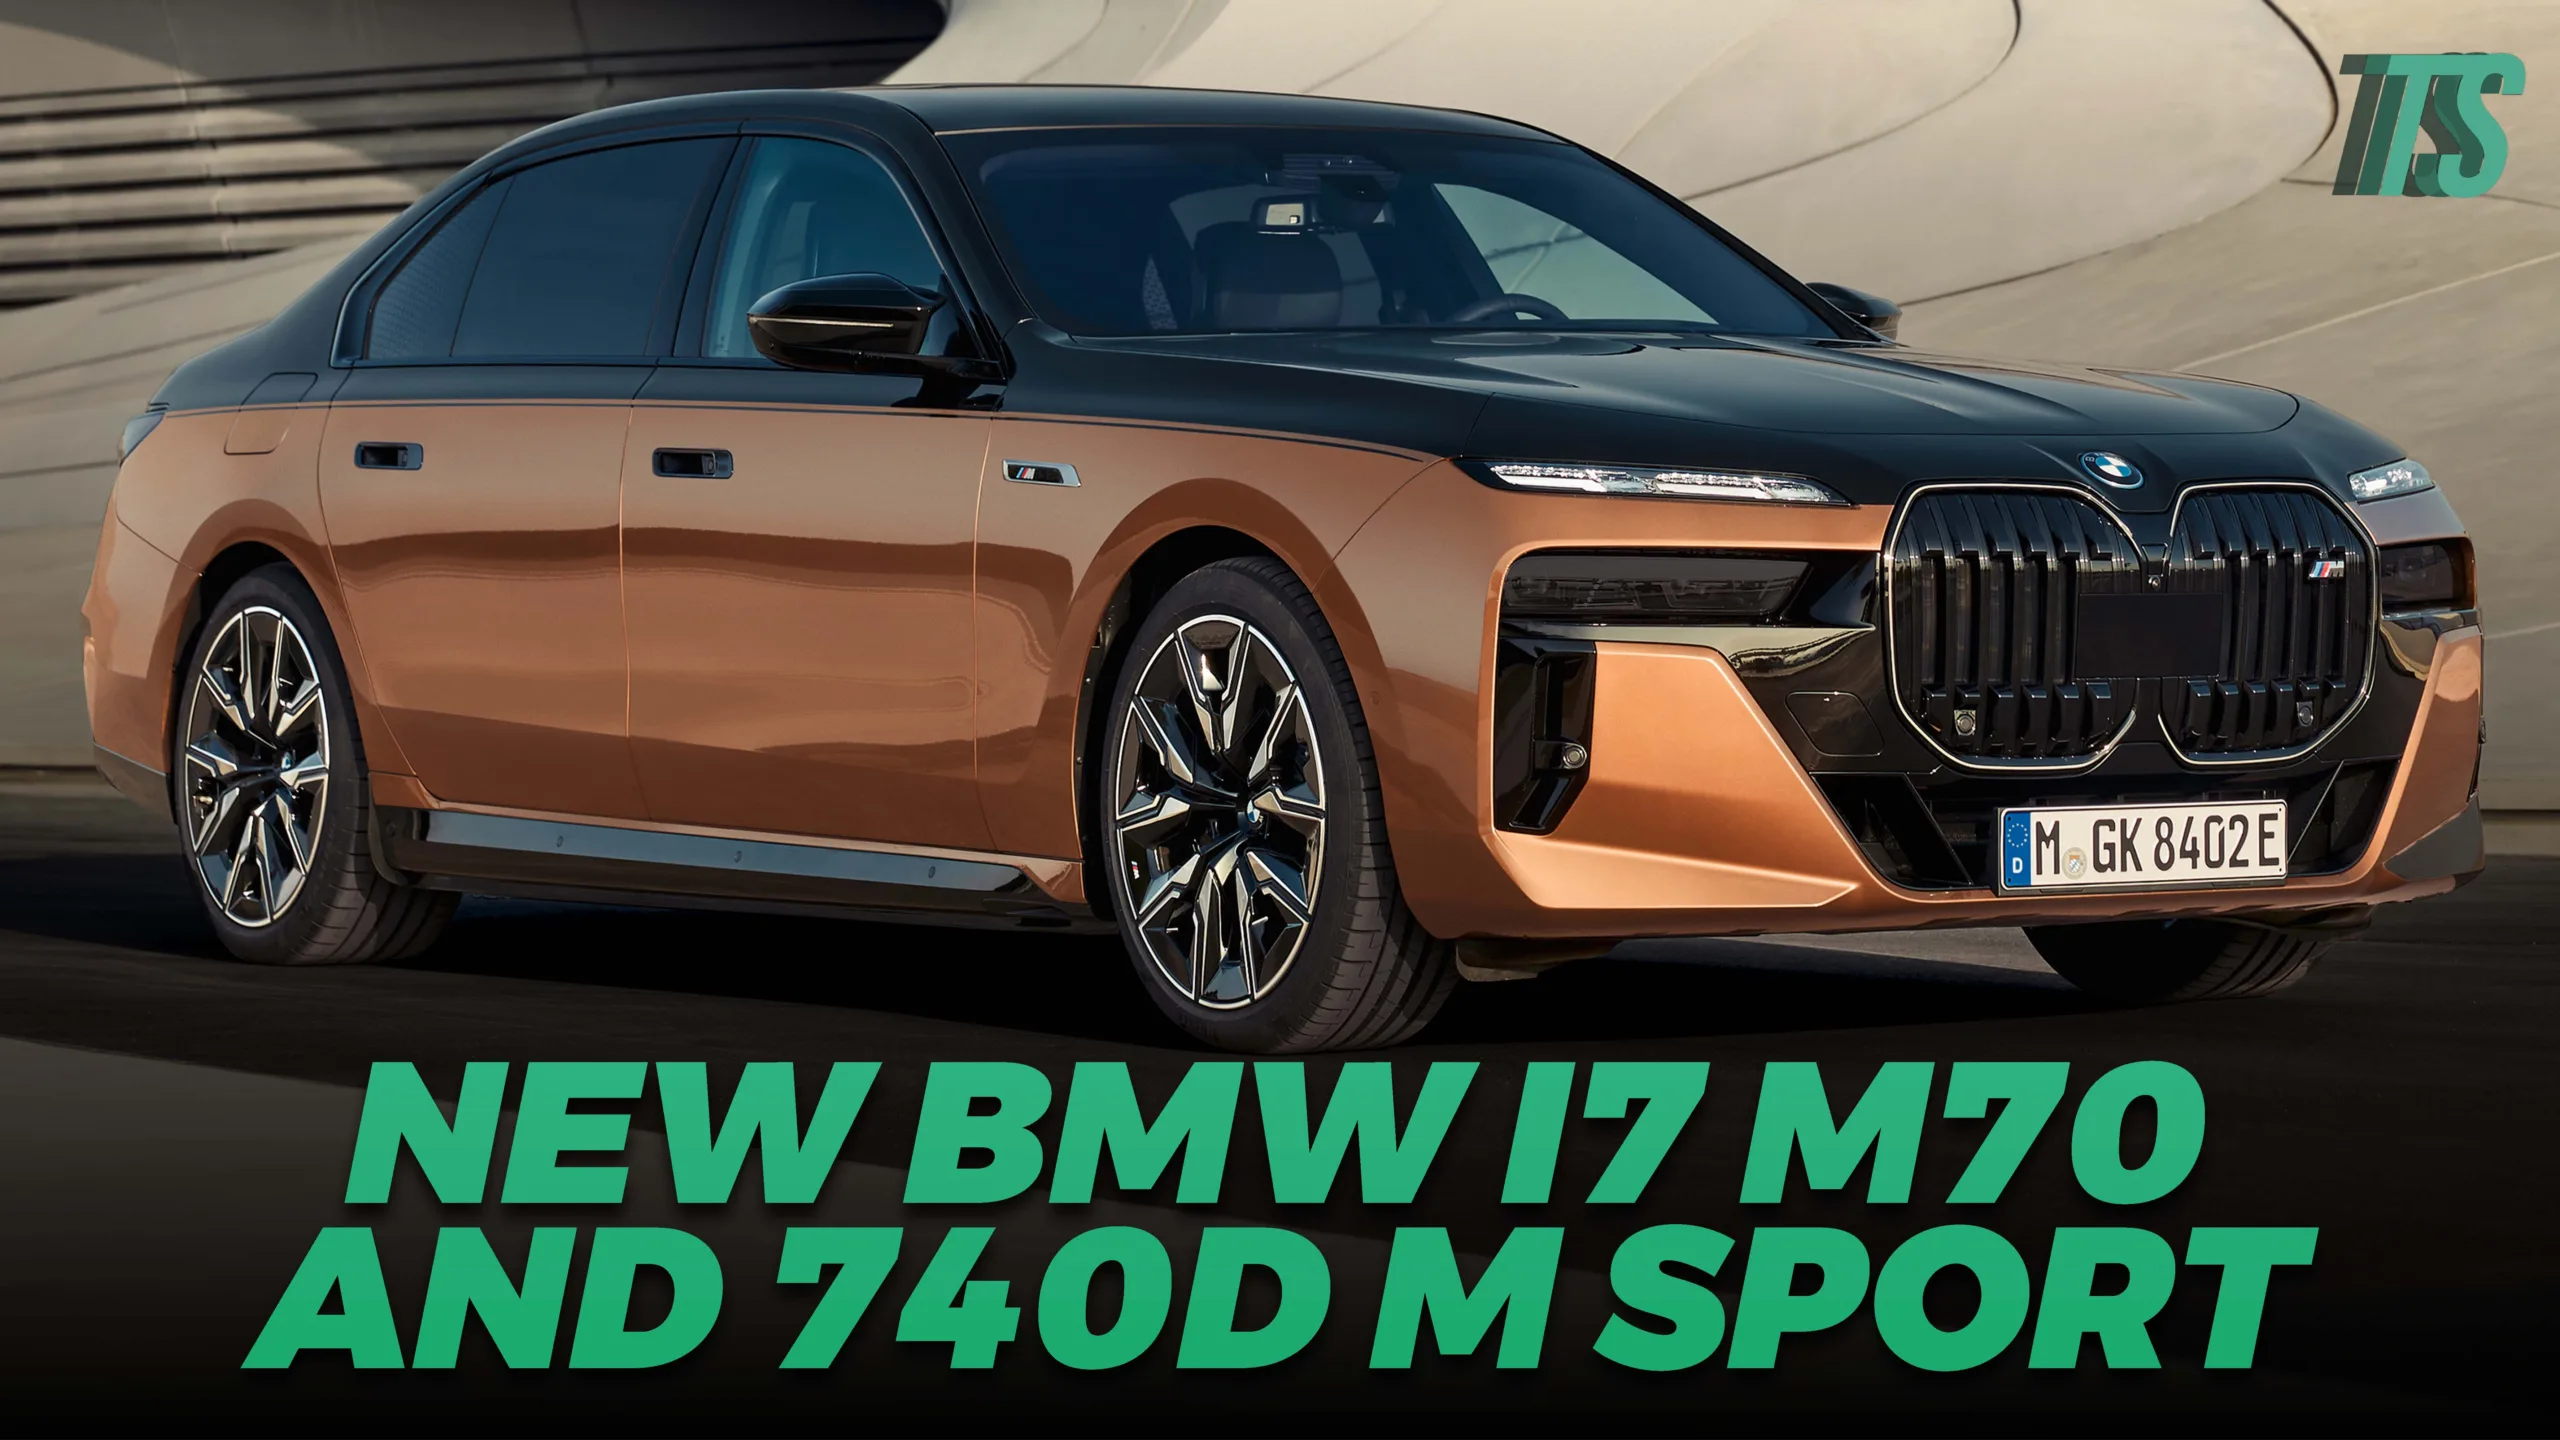 New BMW i7 M70 and 740d M Sport